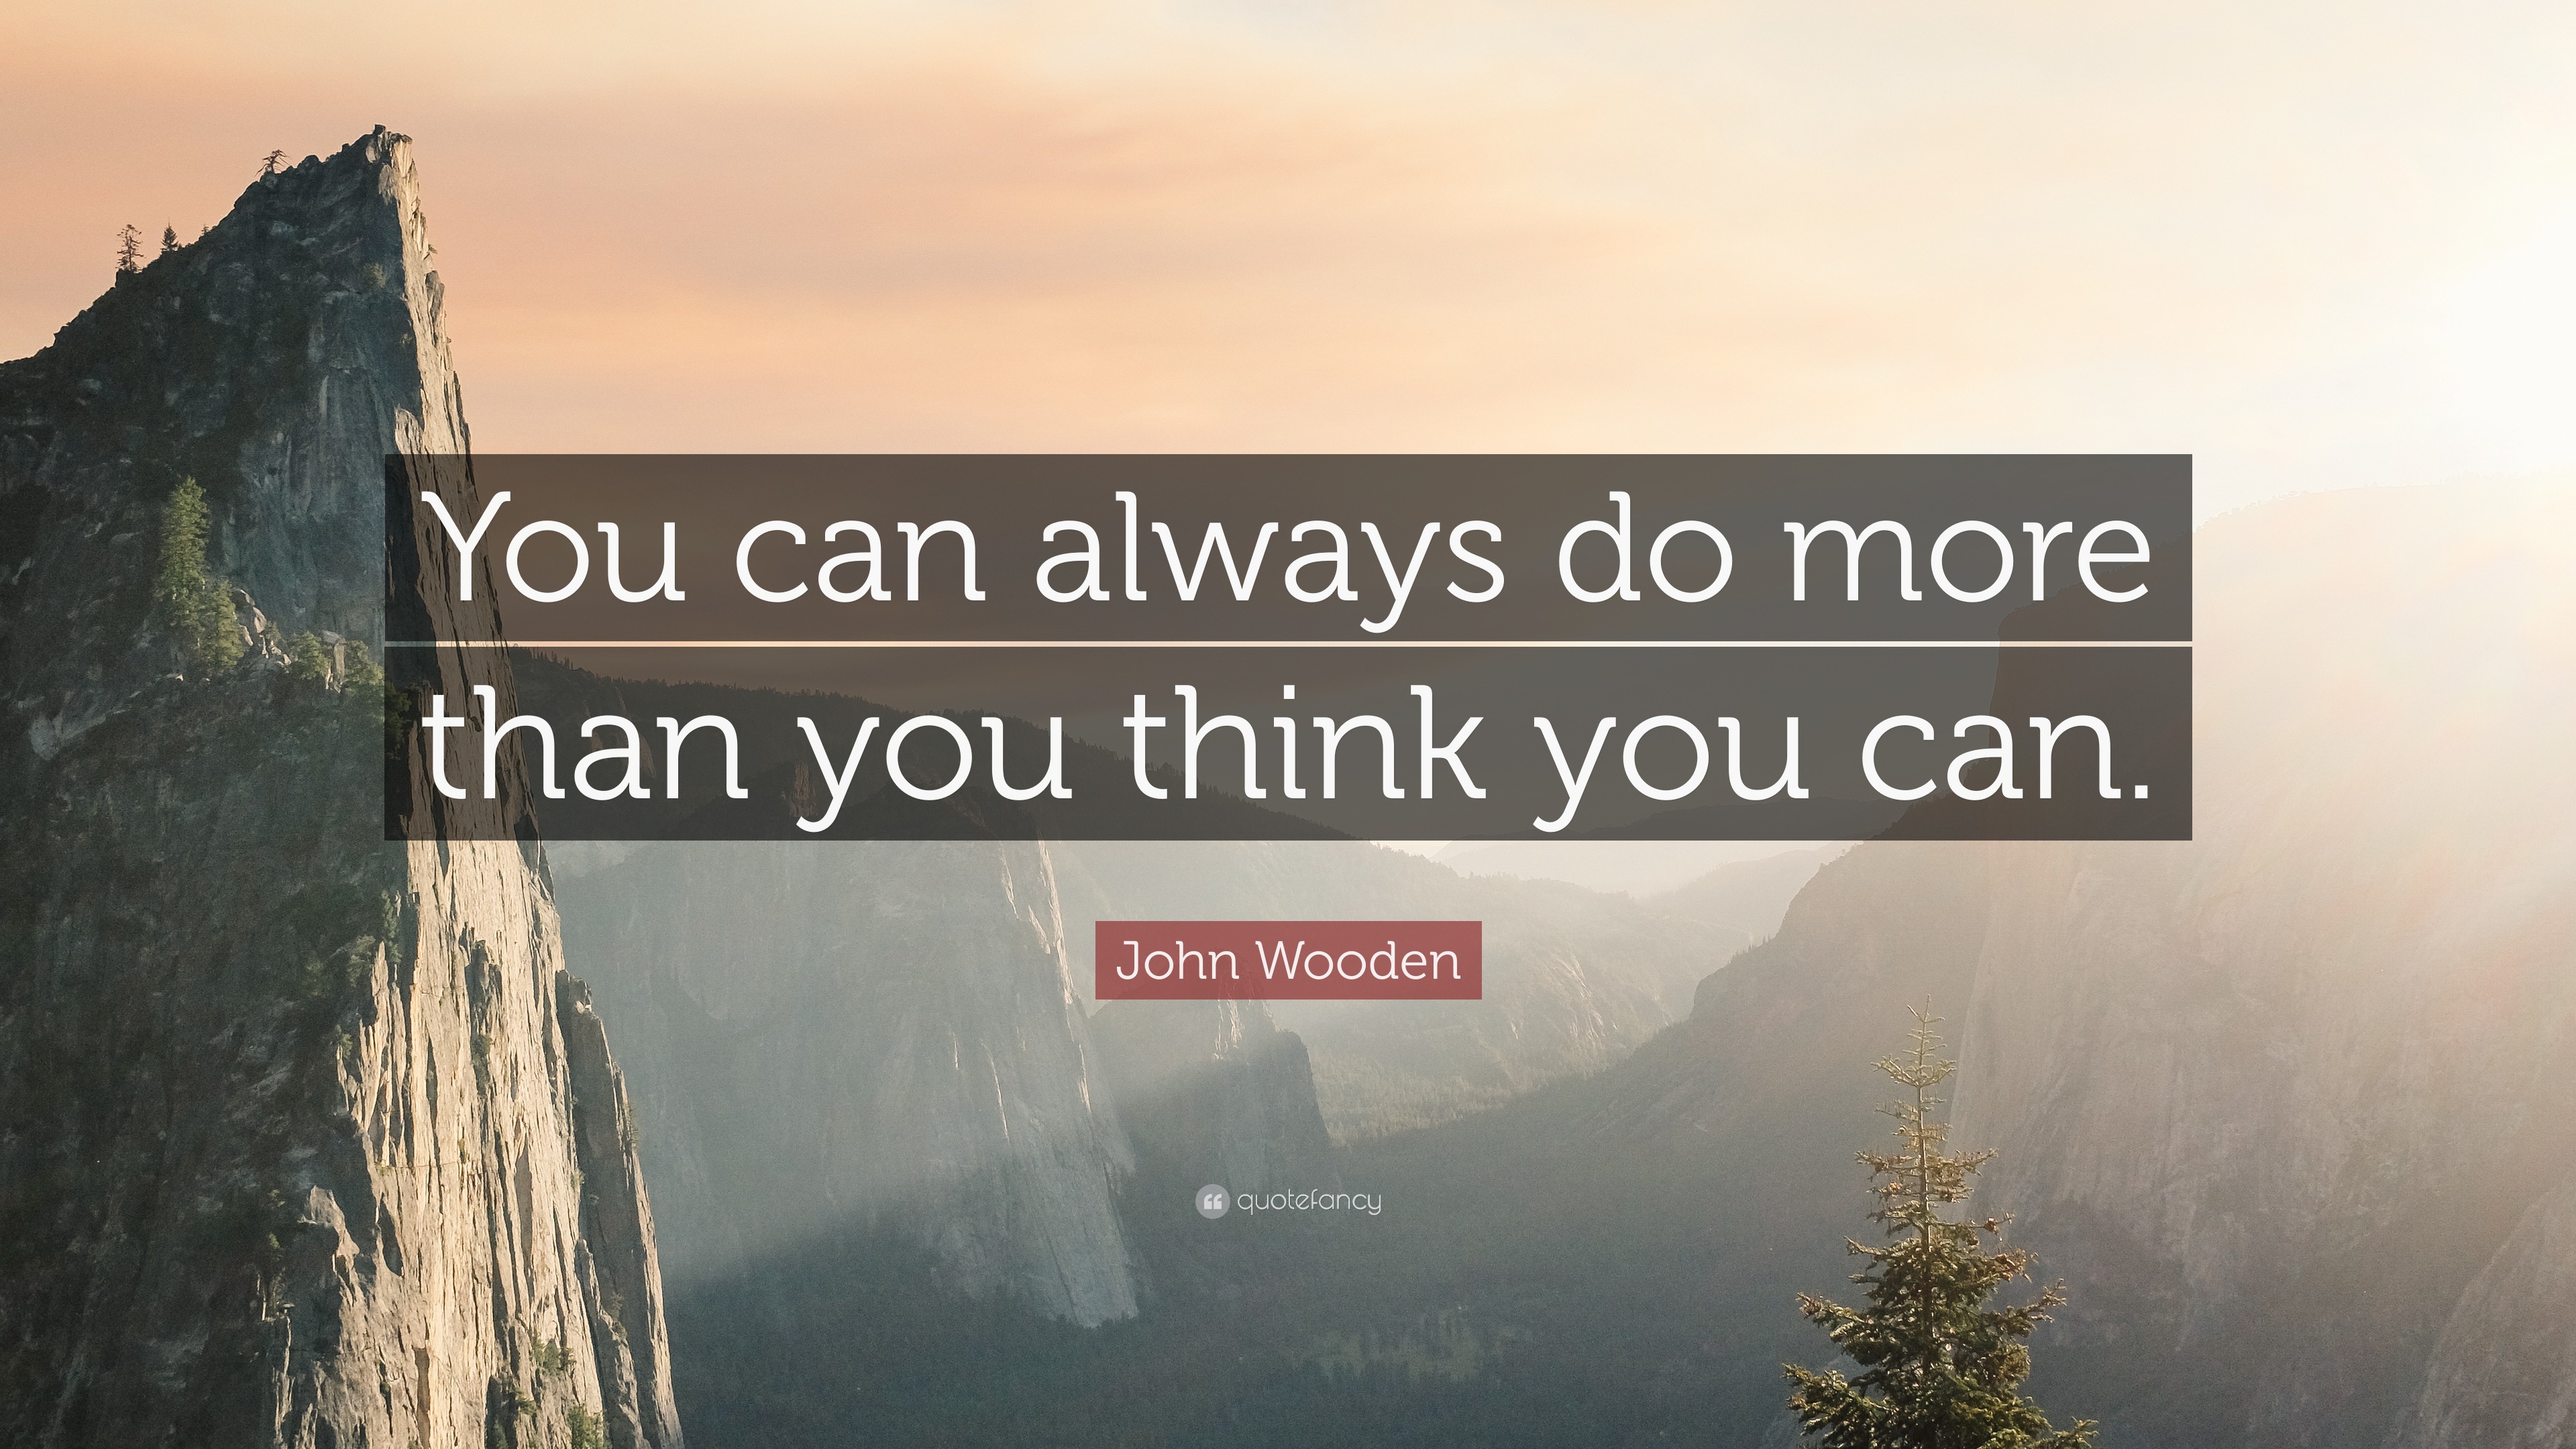 2030301 John Wooden Quote You can always do more than you think you can